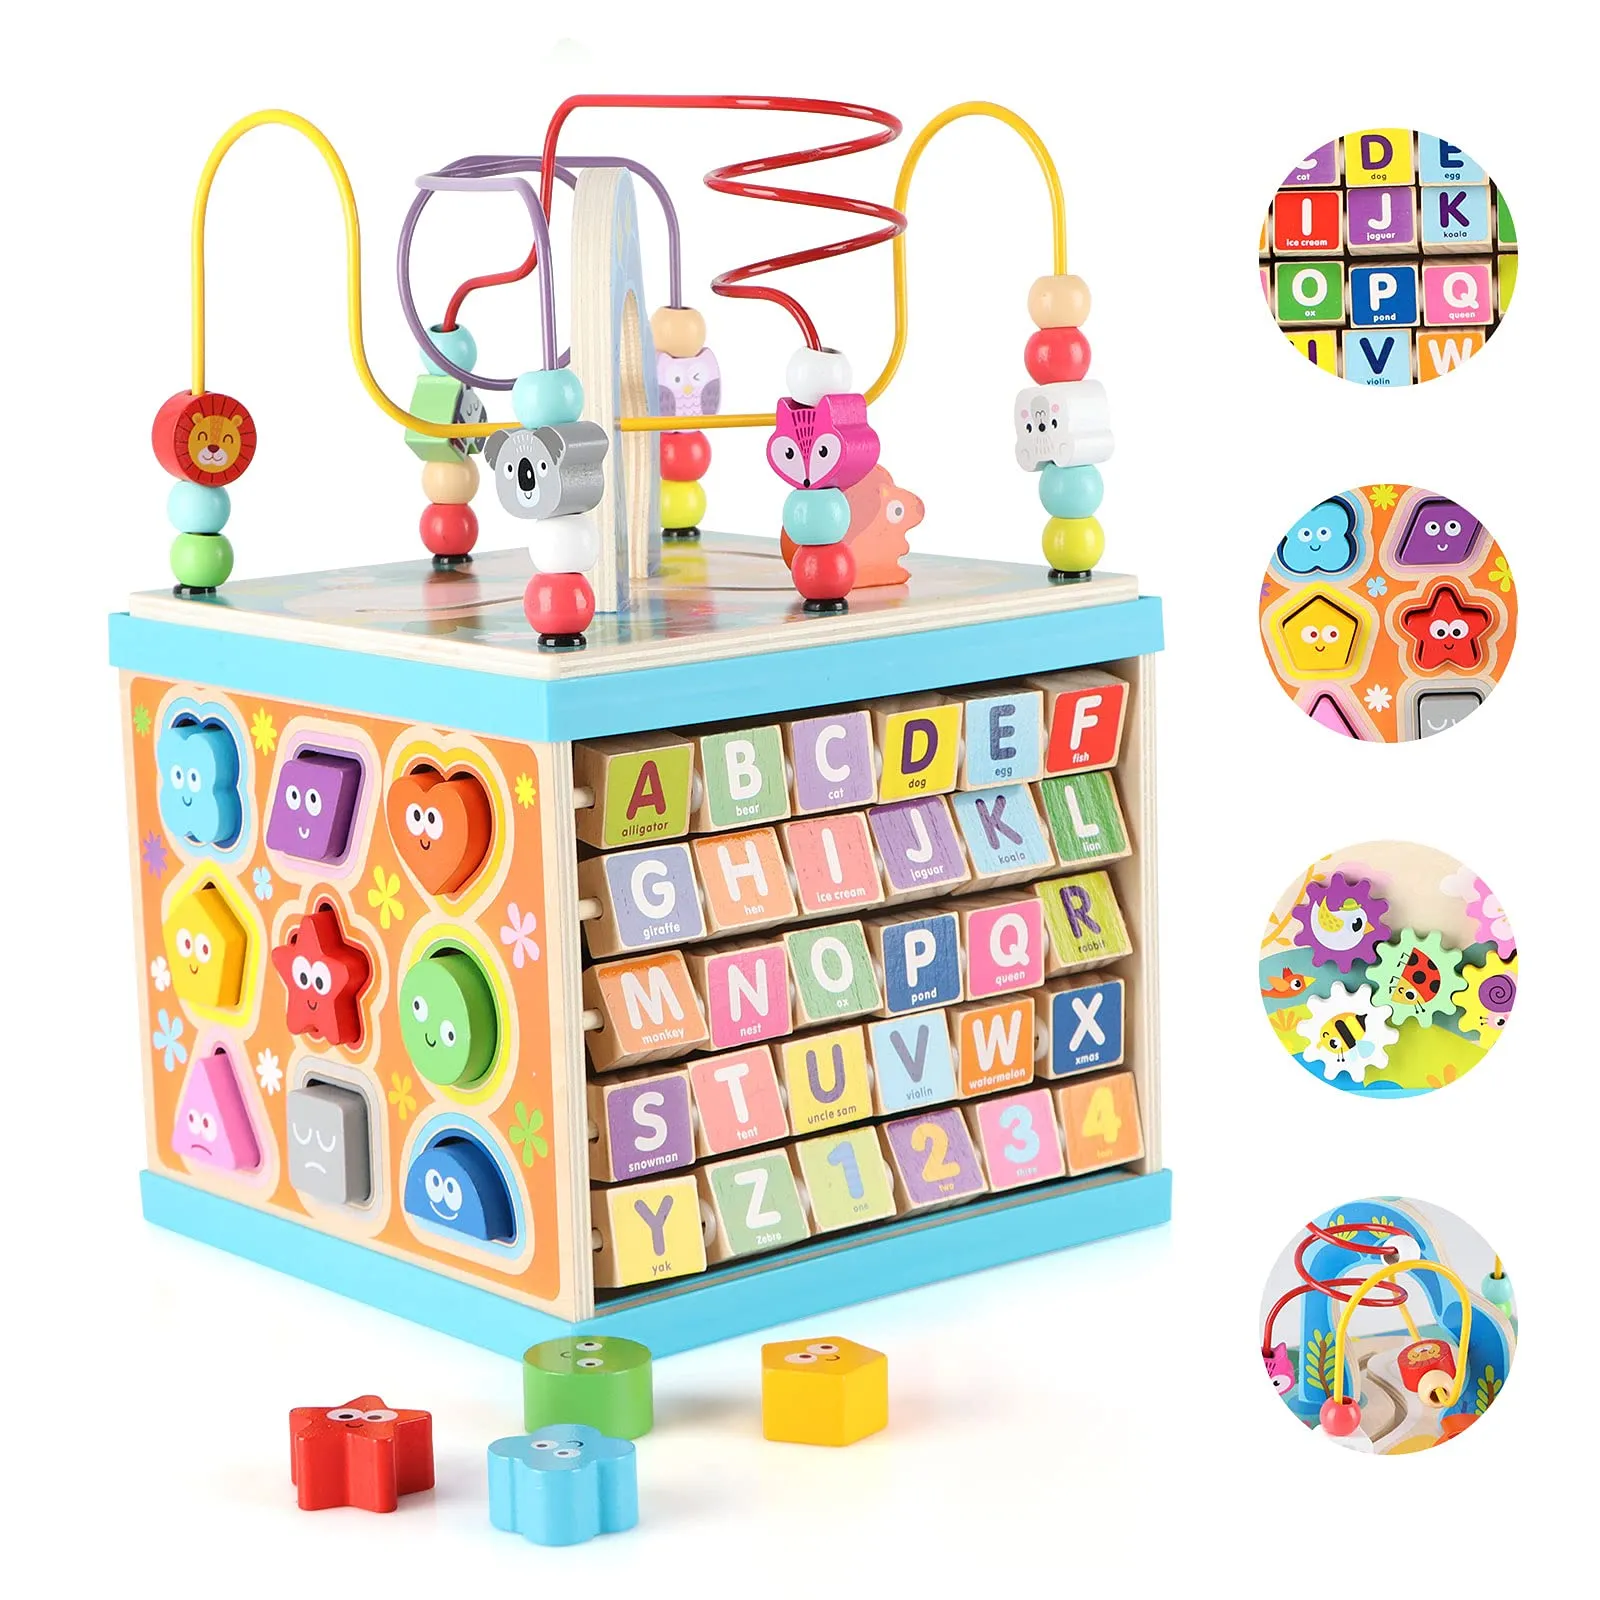 Qilay Wooden Activity Cube